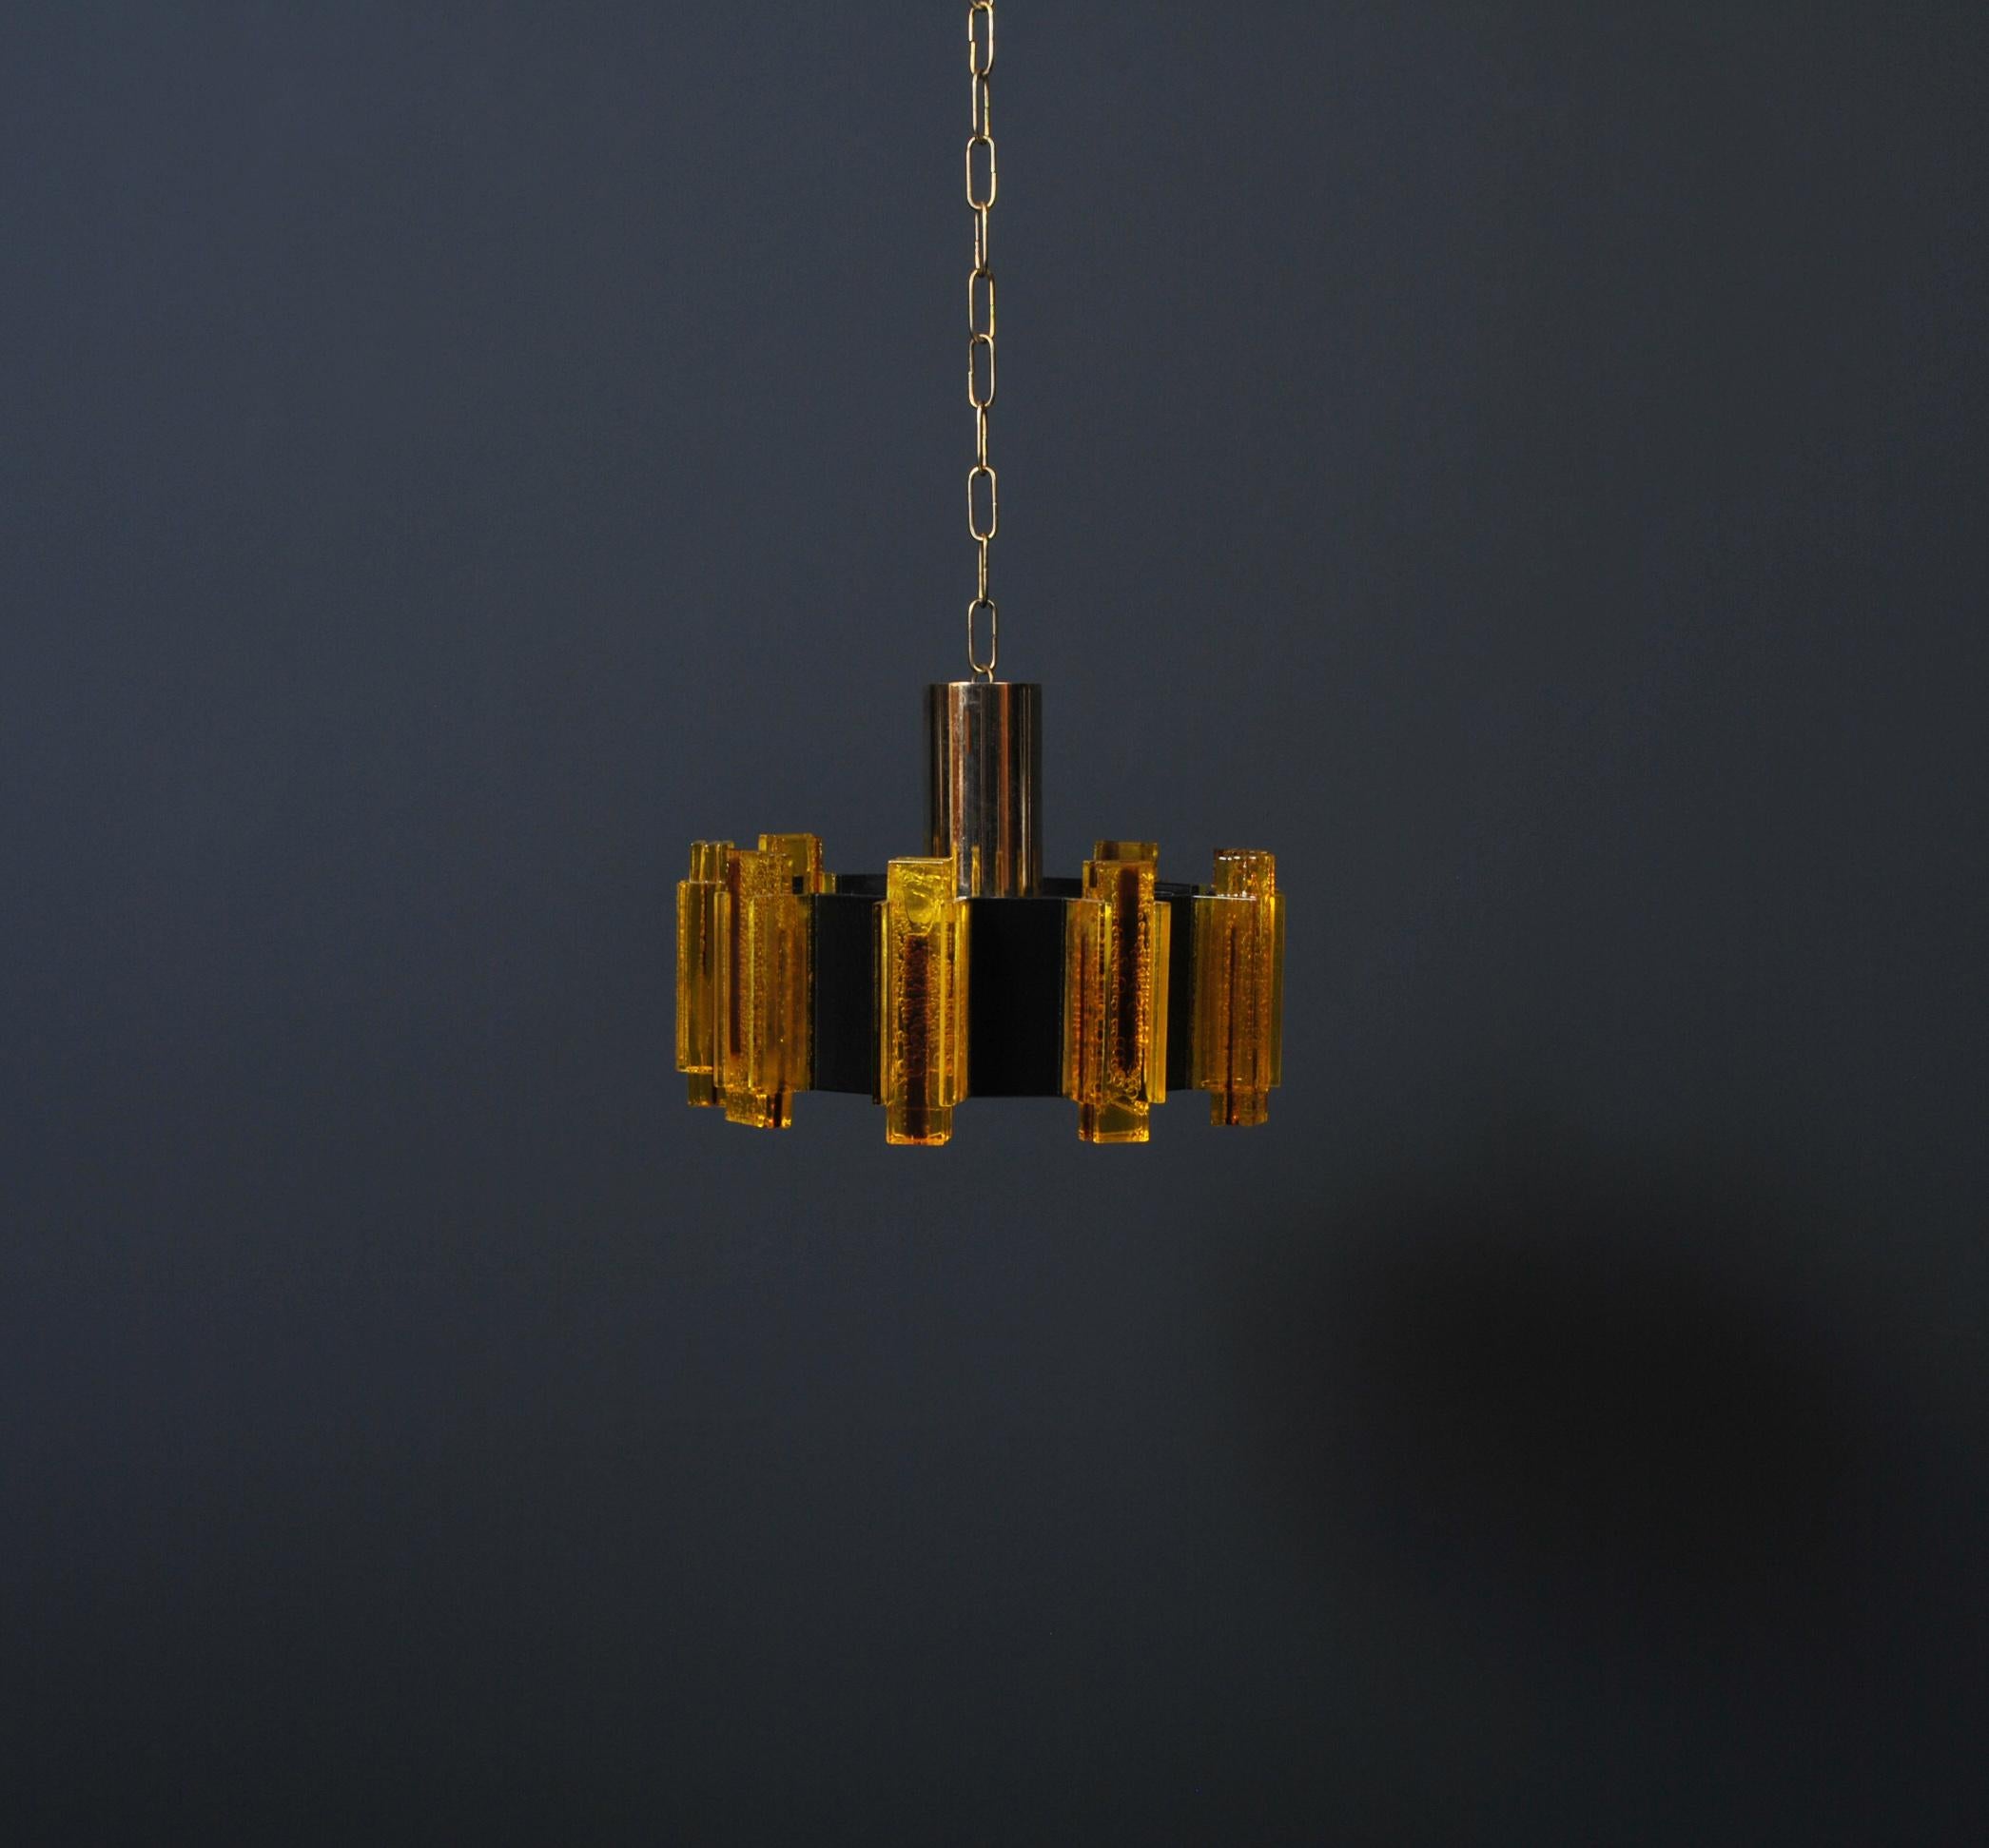 Steel Danish Midcentury Pendant by Claus Bolby for Cebo